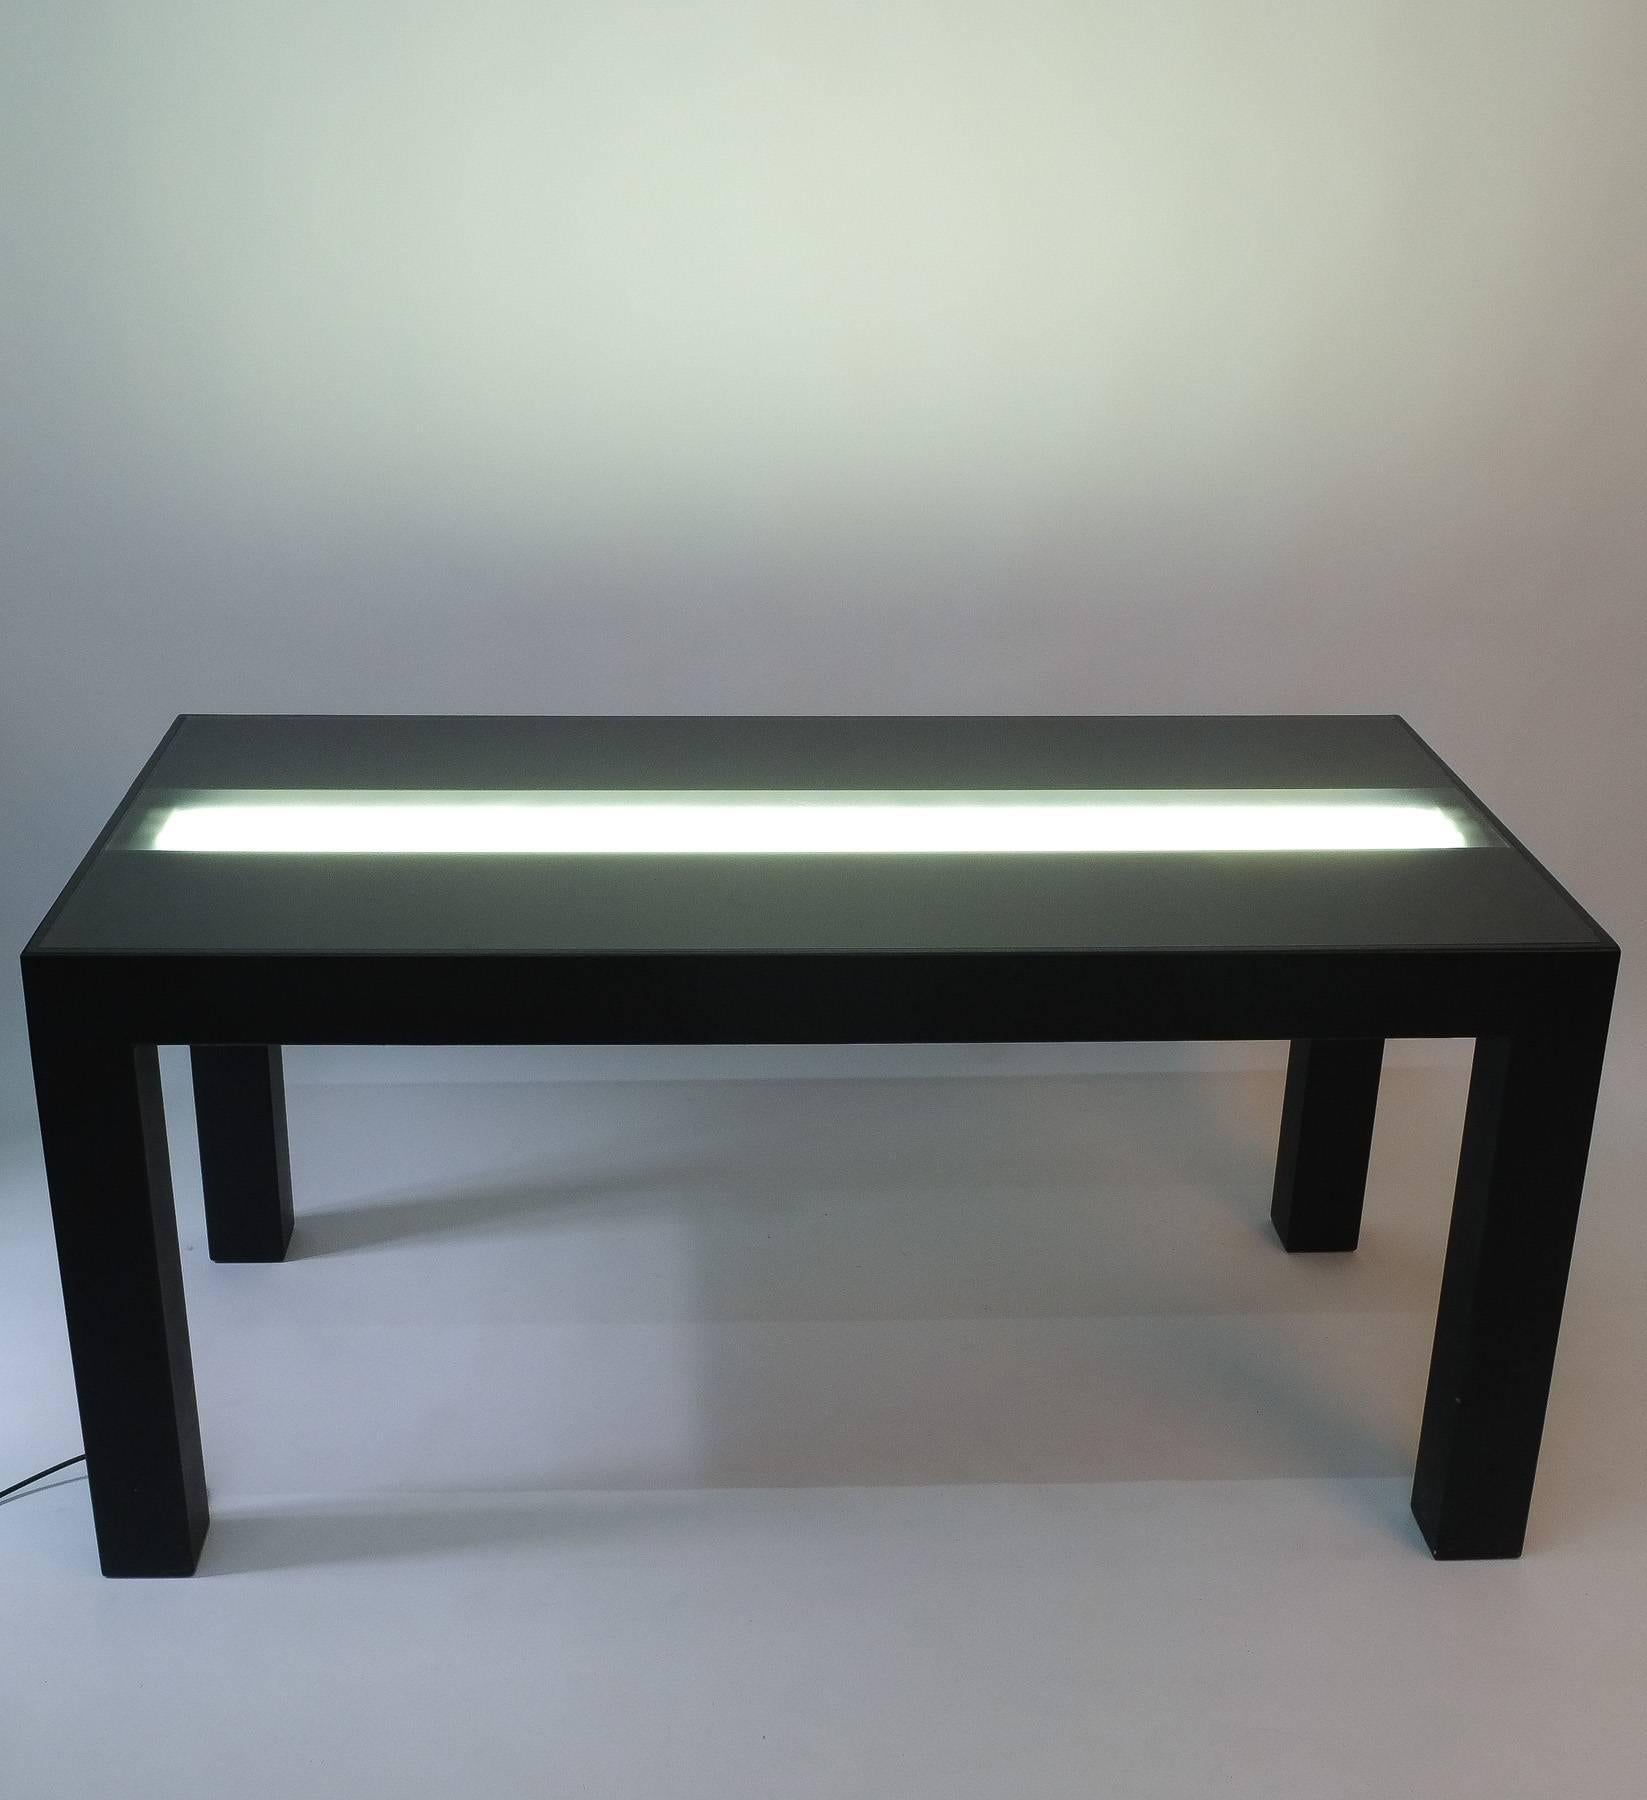 Johanna Grawunder Illuminated Dining Table by  for Post-Design, 2001 For Sale 1